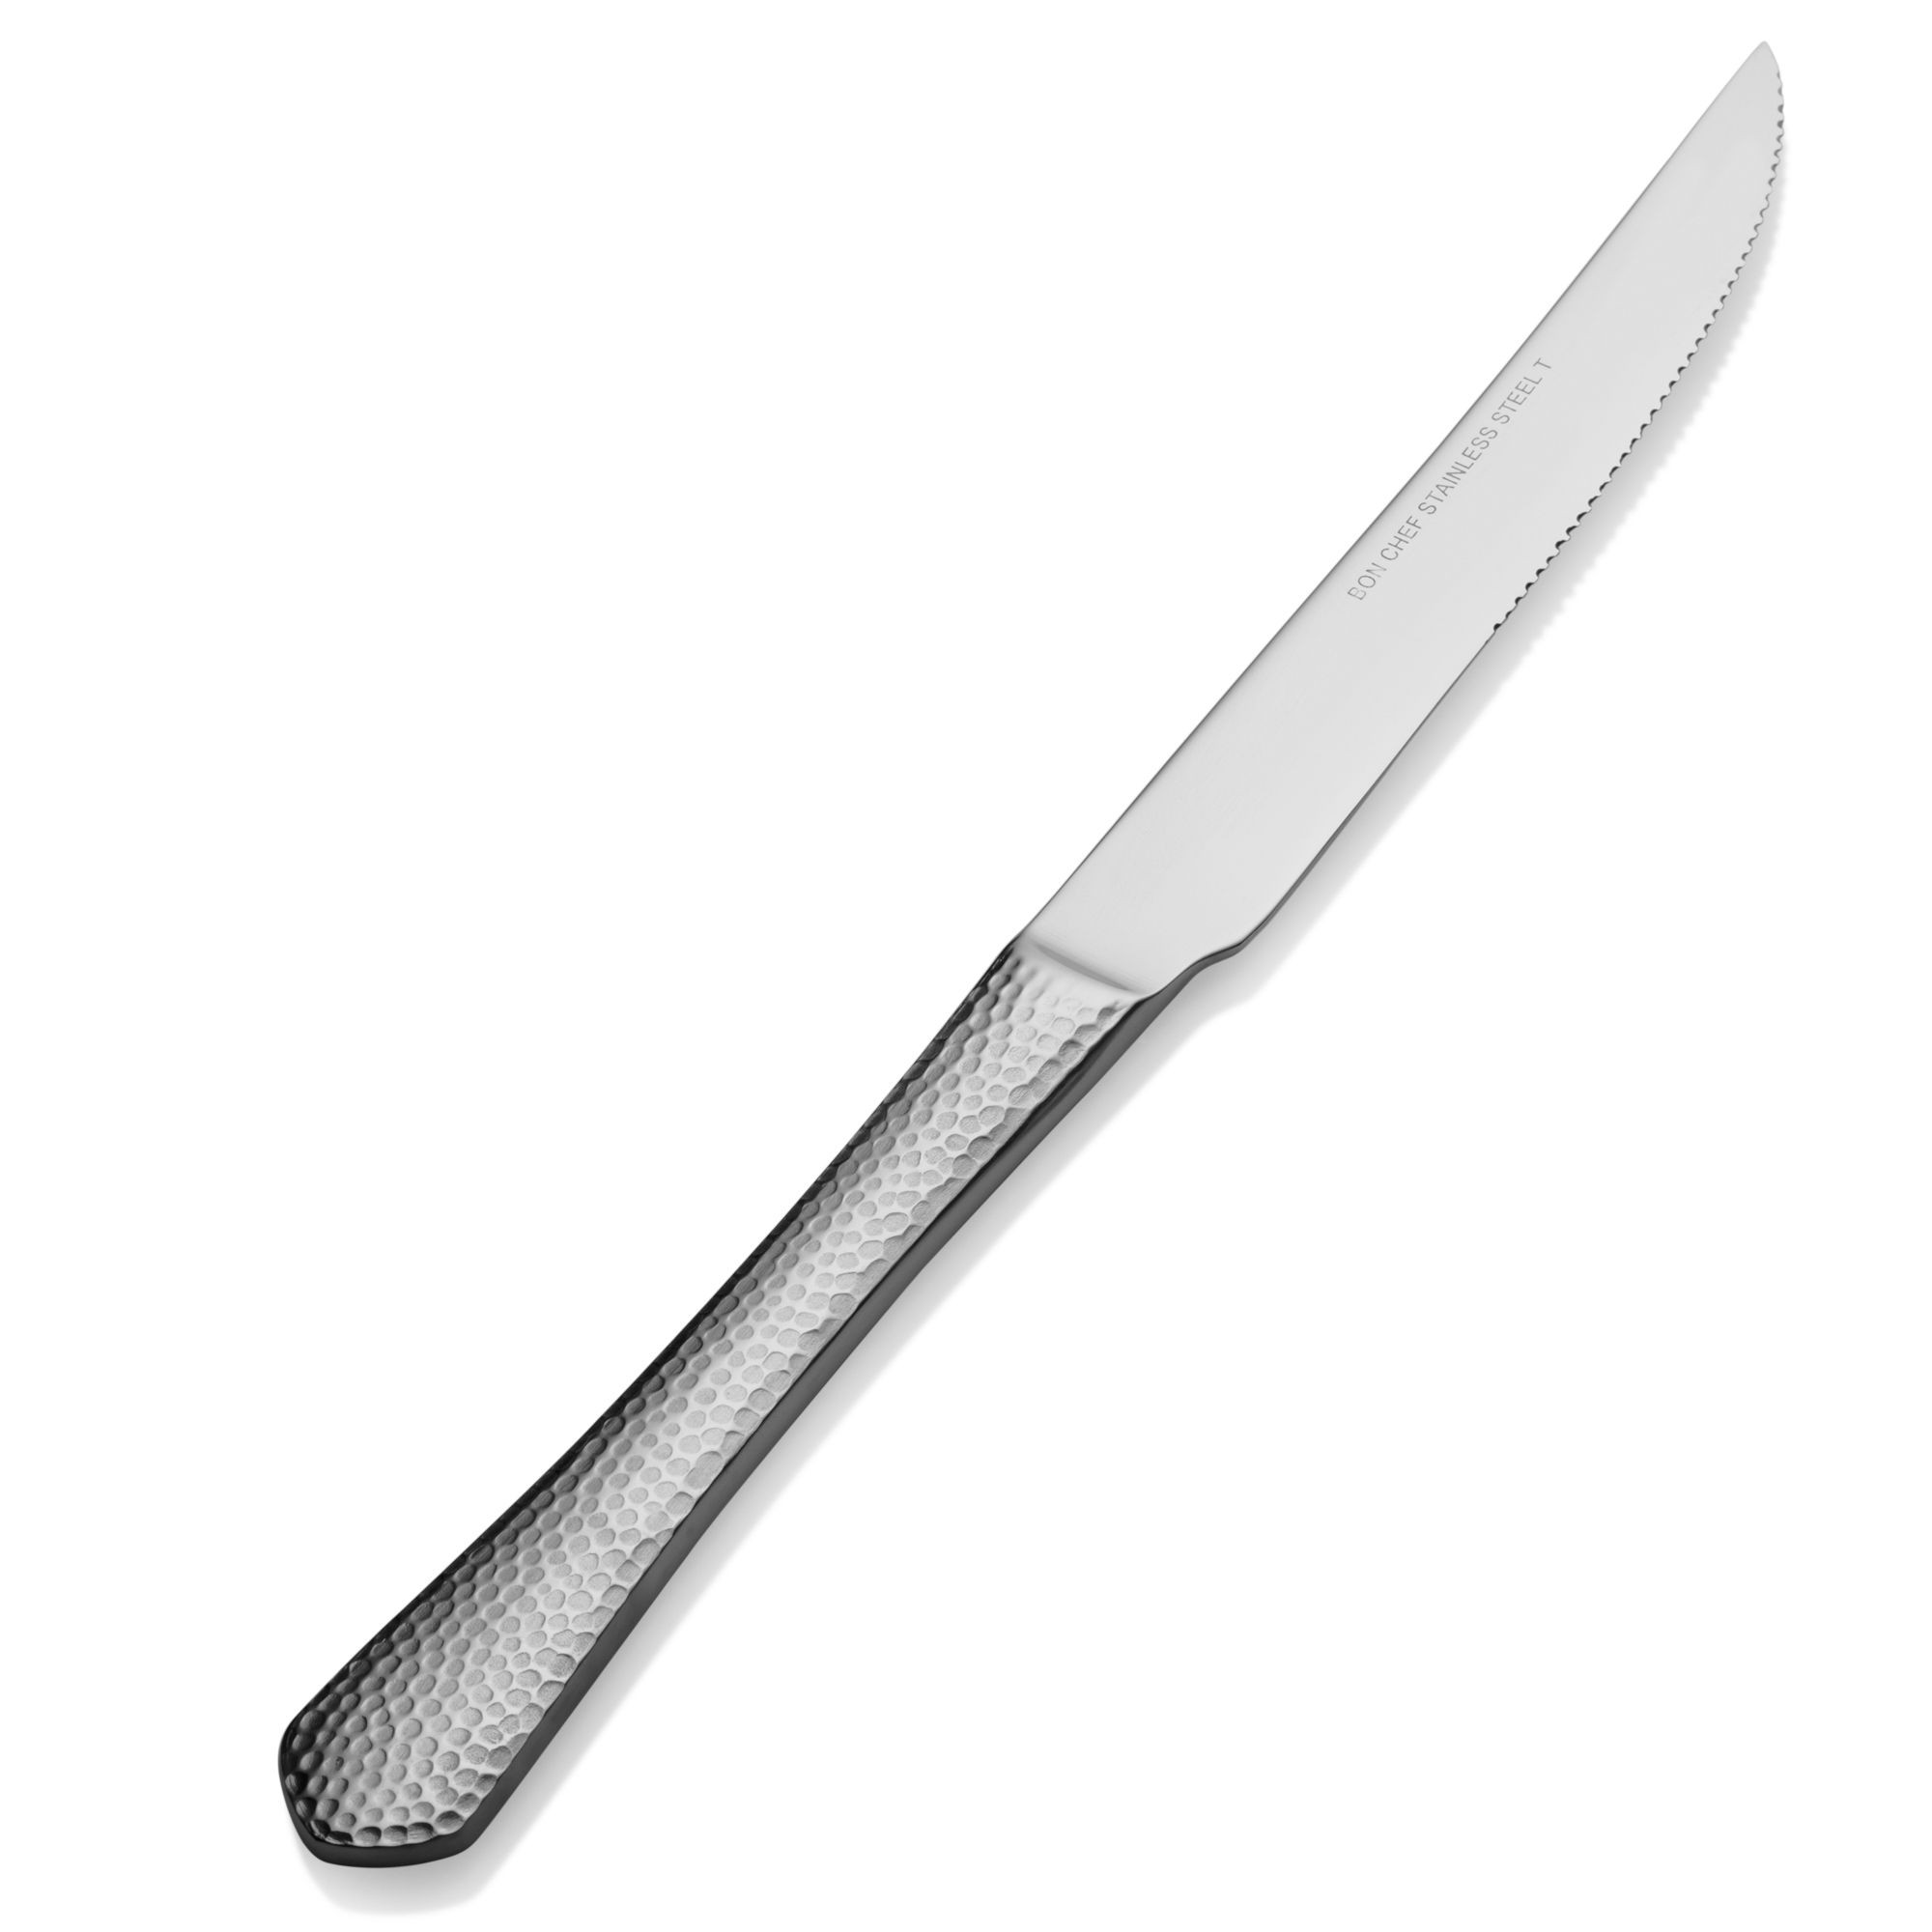 Bon Chef S1215 Reflections 18/8 Stainless Steel European Solid Handle Steak Knife